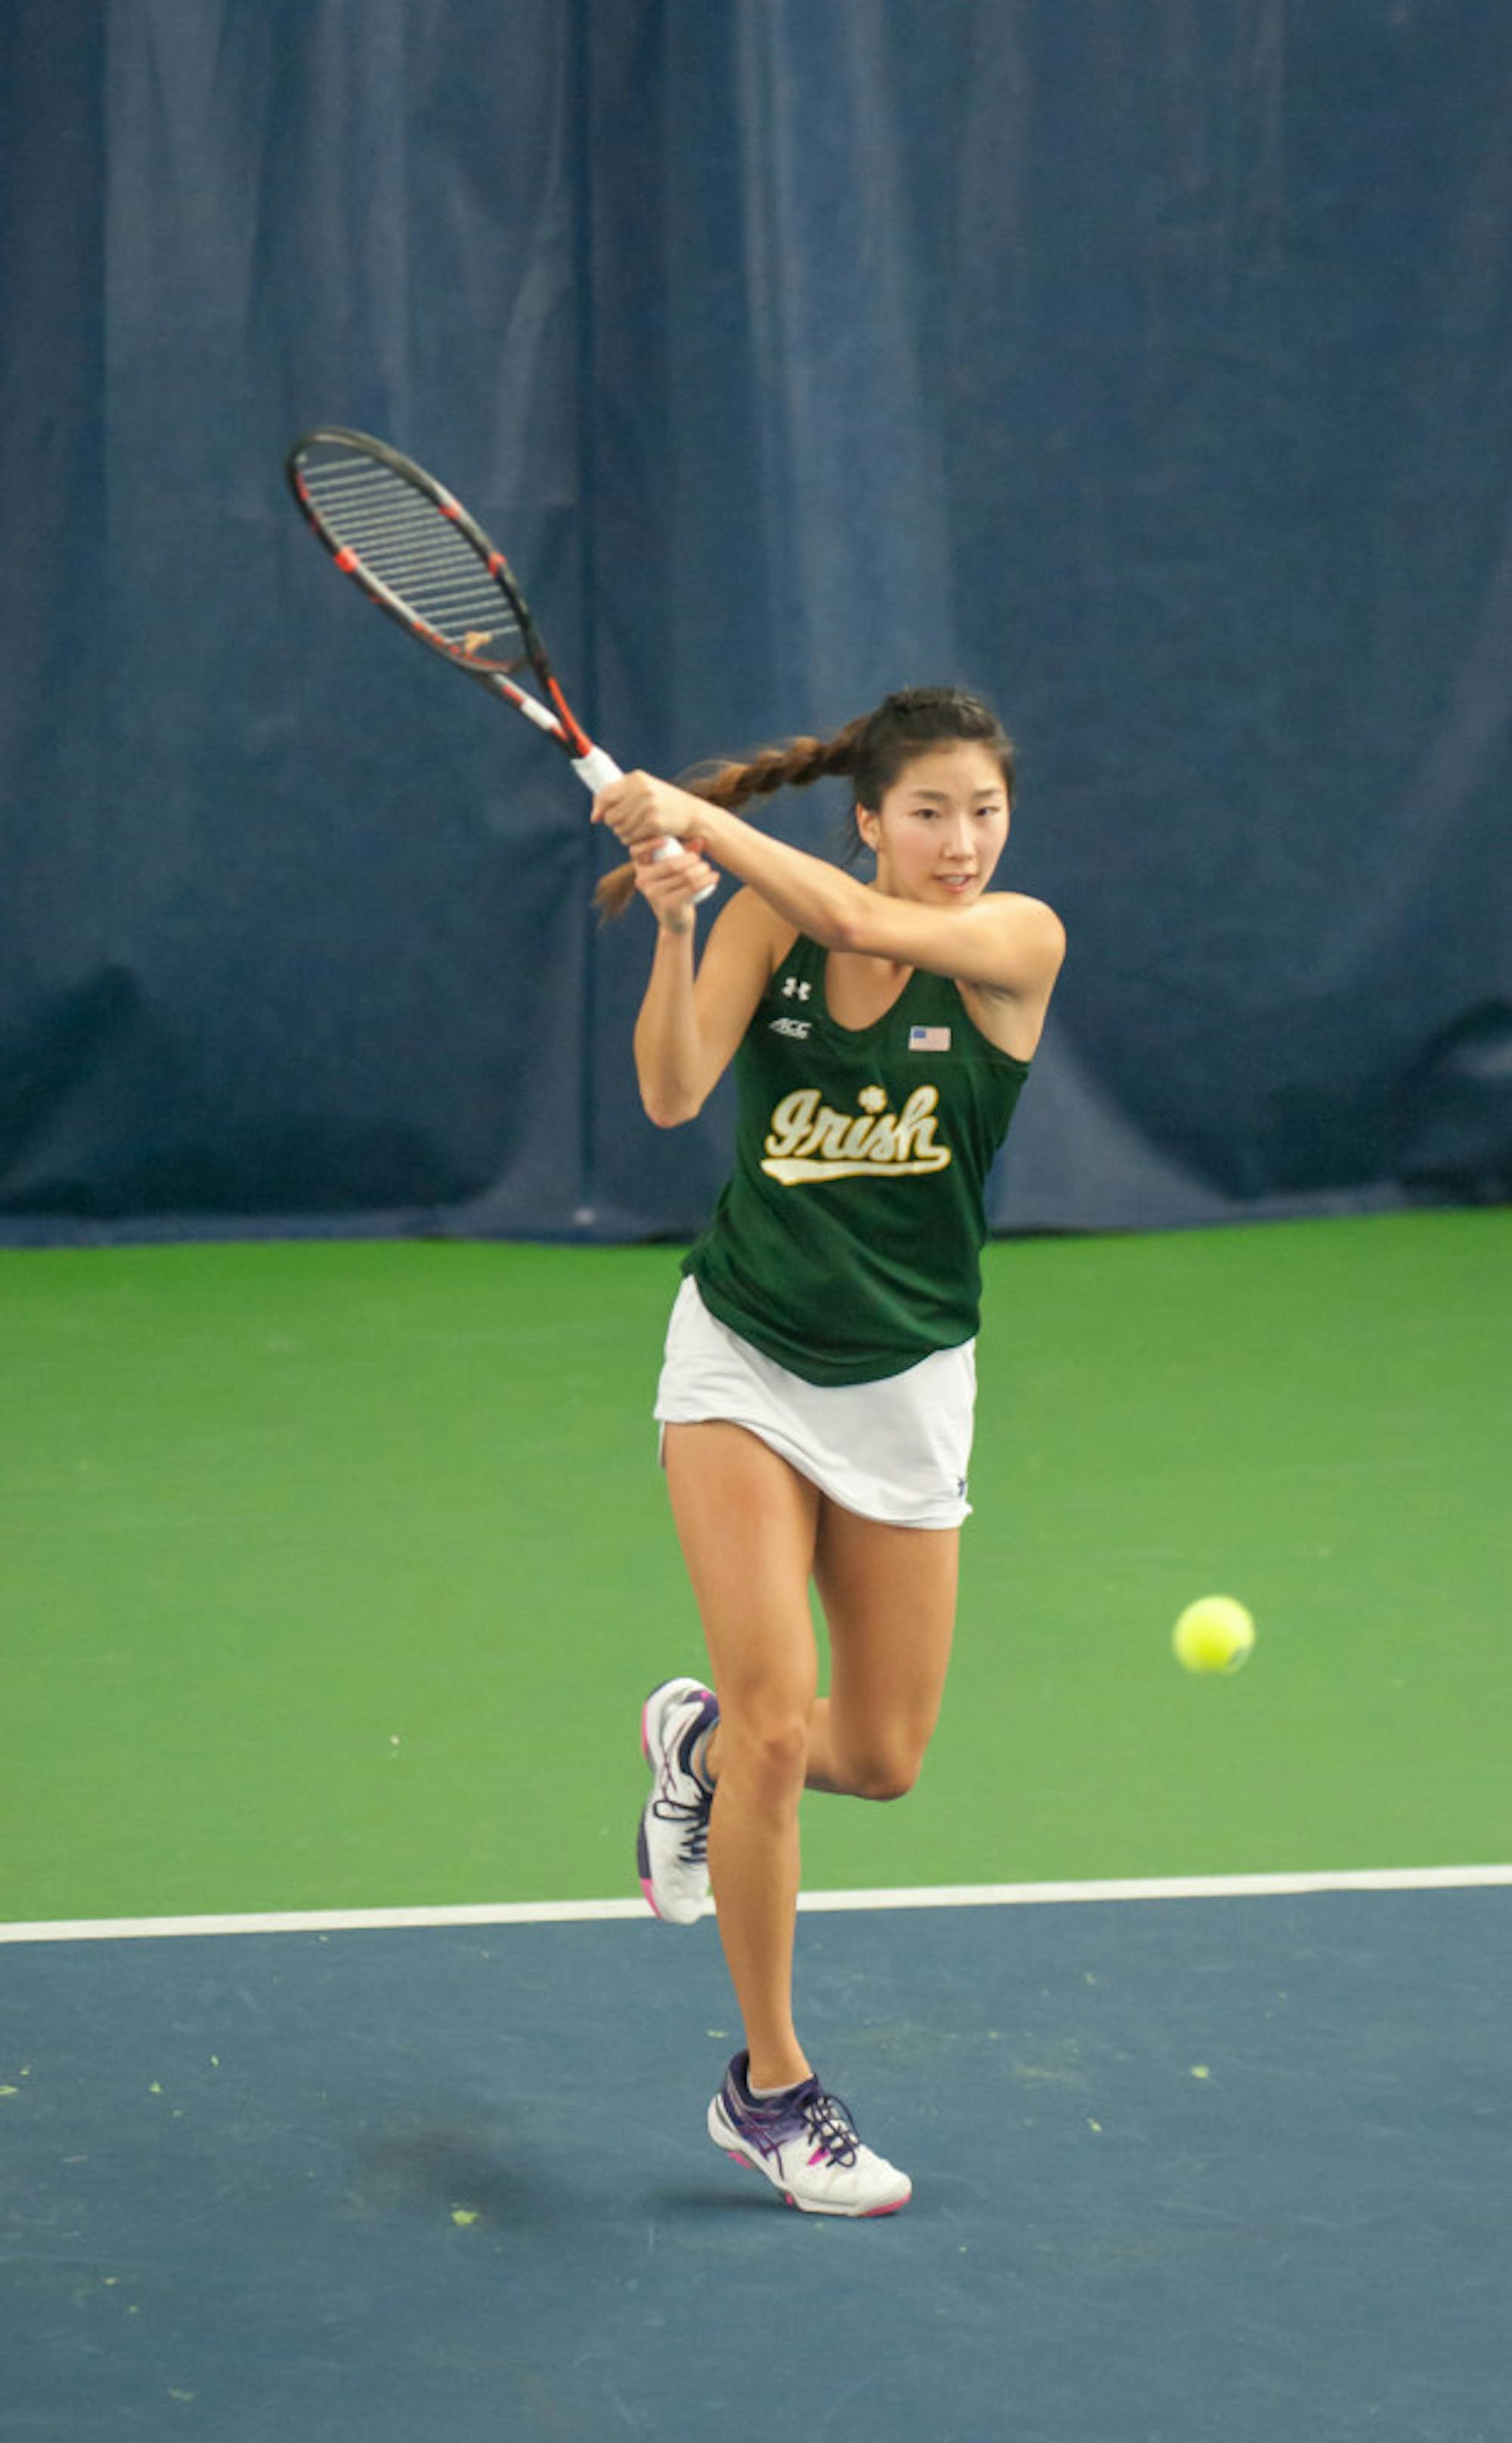 Irish junior Rachel Chong returns a backhand during Notre Dame's 5-2 win over Purdue on Feb. 22 at Eck Tennis Pavilion. Chong was one of three Irish athletes undefeated in singles play this past weekend.